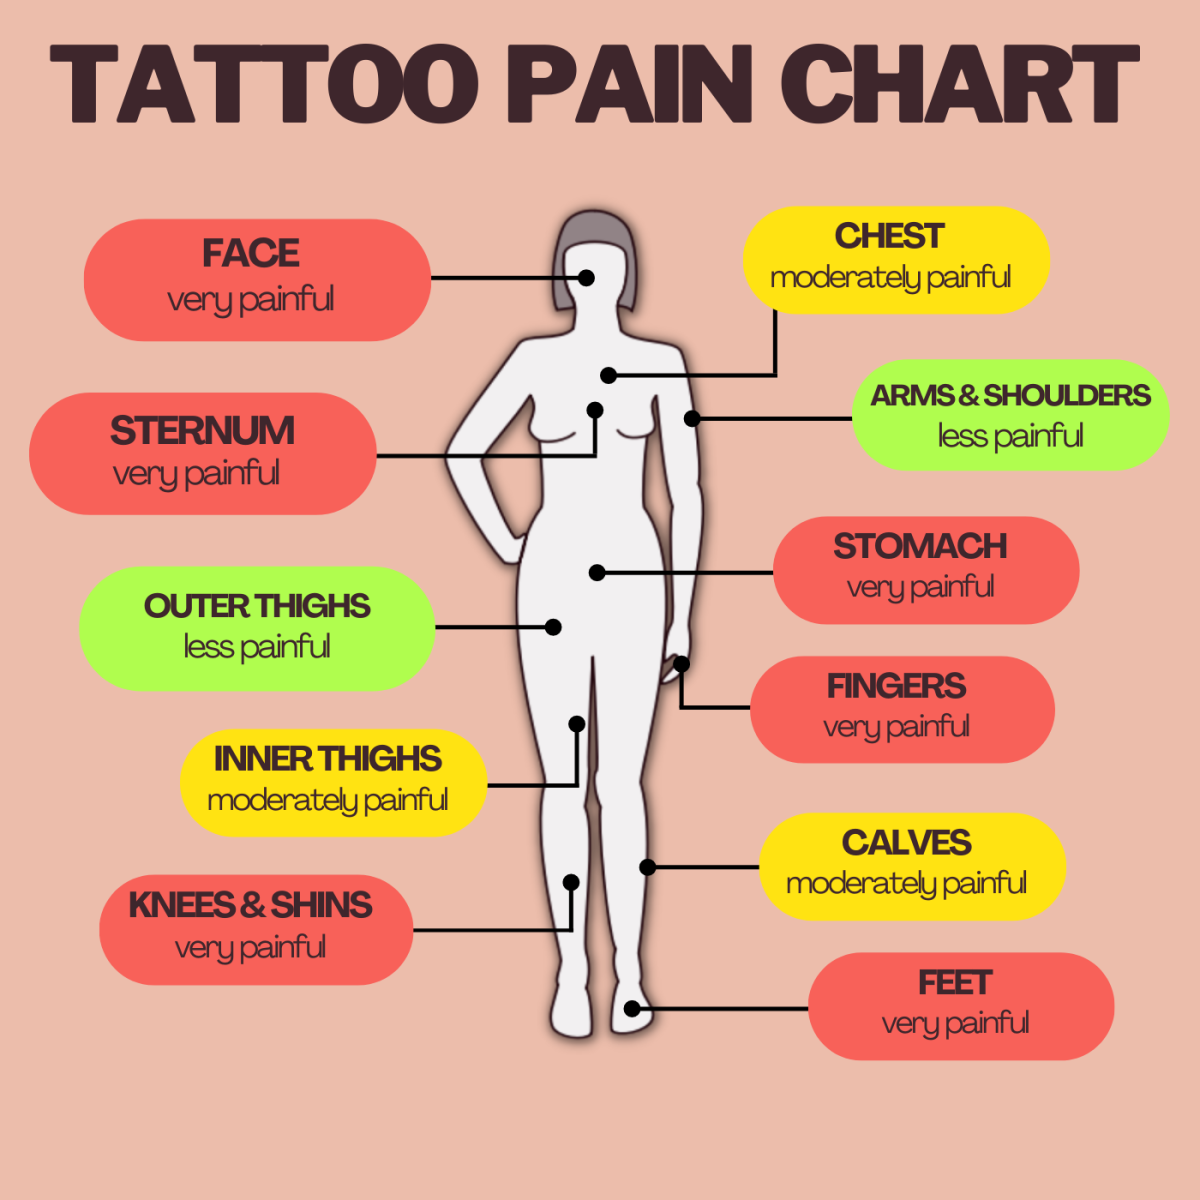 Tips and Tricks for Dealing With Tattoo Pain - TatRing